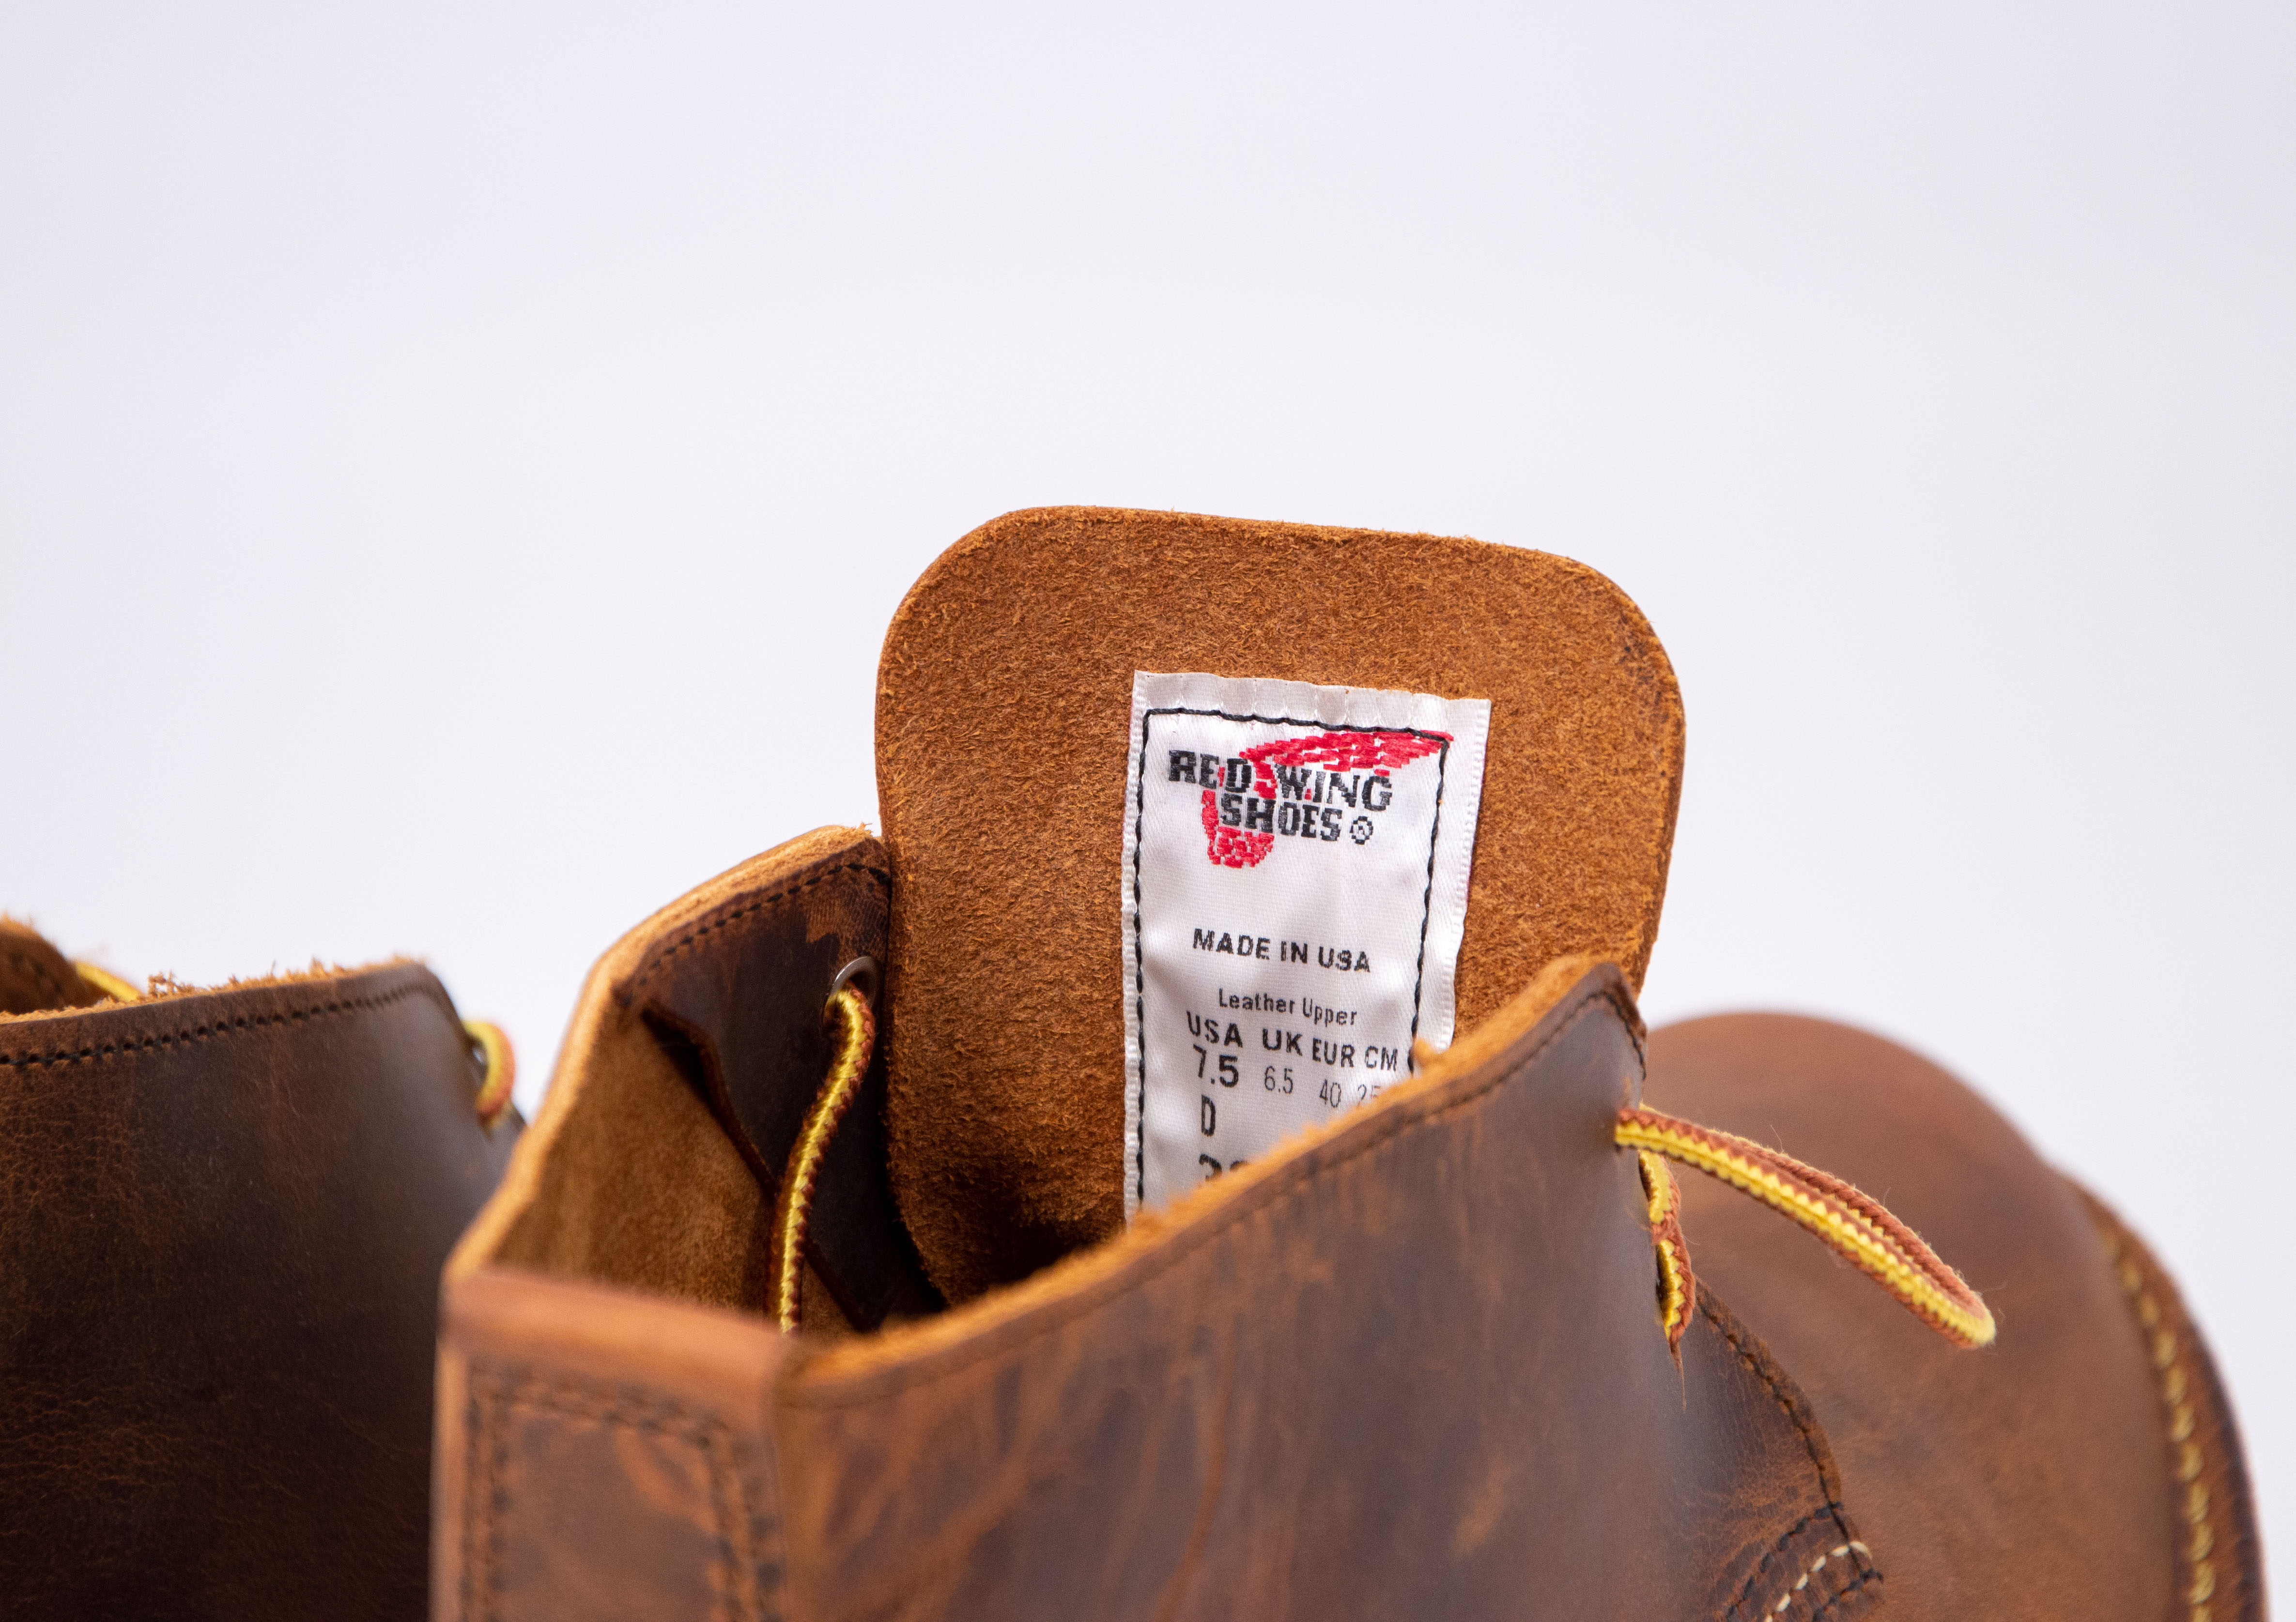 Red Wing  - WEEKENDER CHUKKA 3322 - Copper Rough & Tough